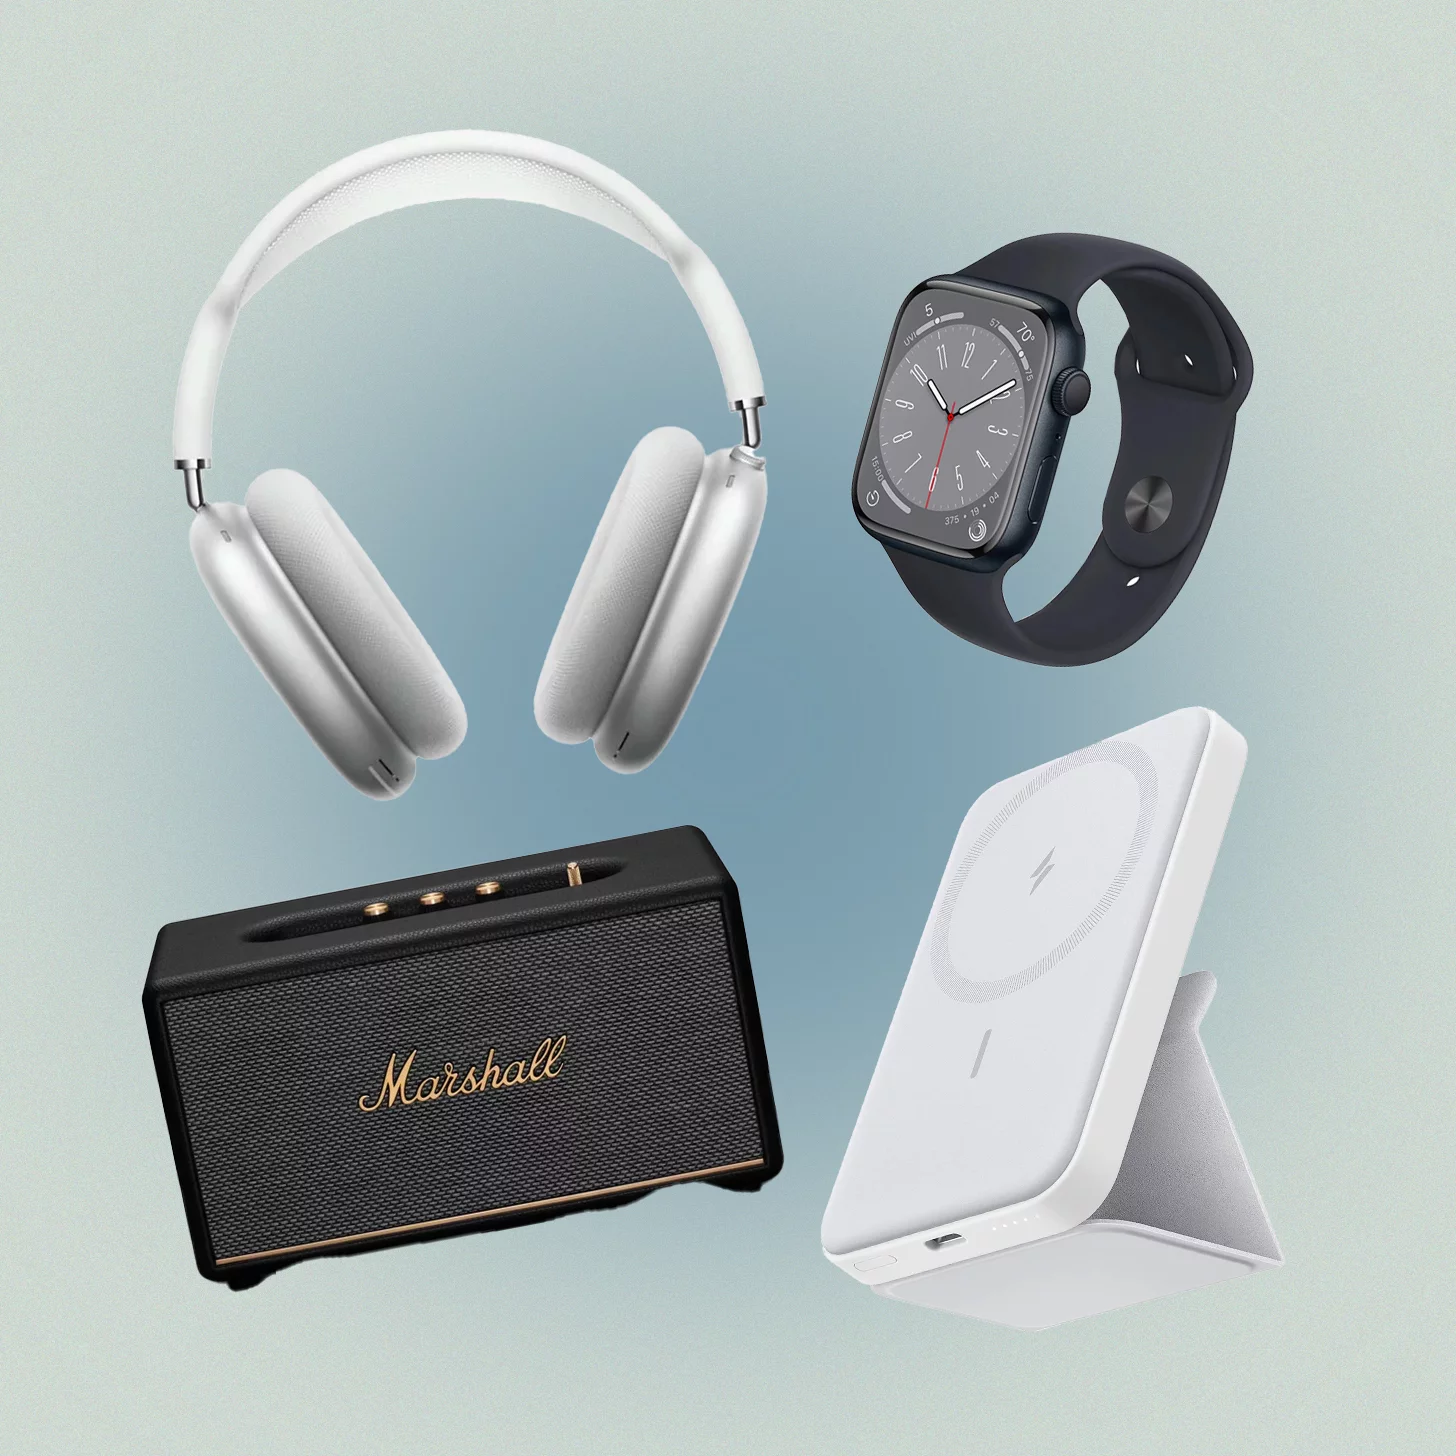 Express Shipping for Gadgets or Accessories: